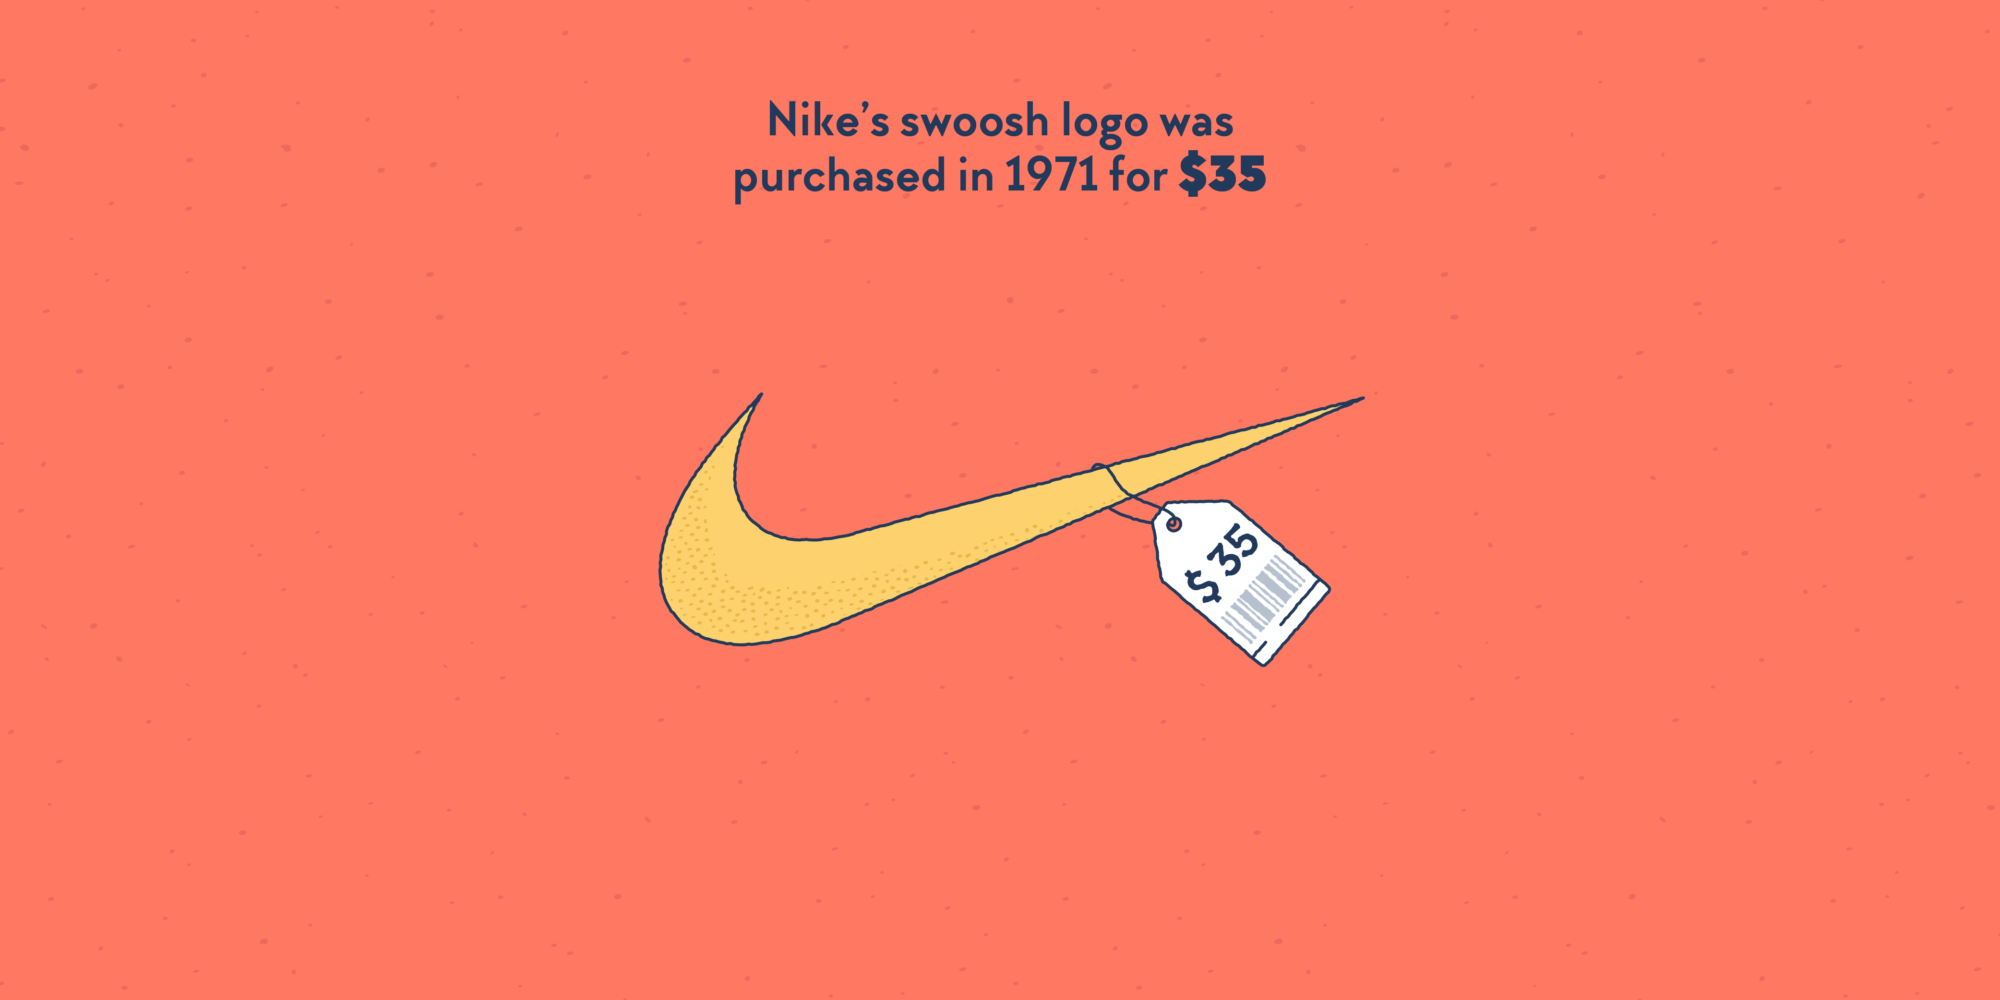 tonight sinner Sui Nike's swoosh logo was purchased in 1971 for $35 – Factourism